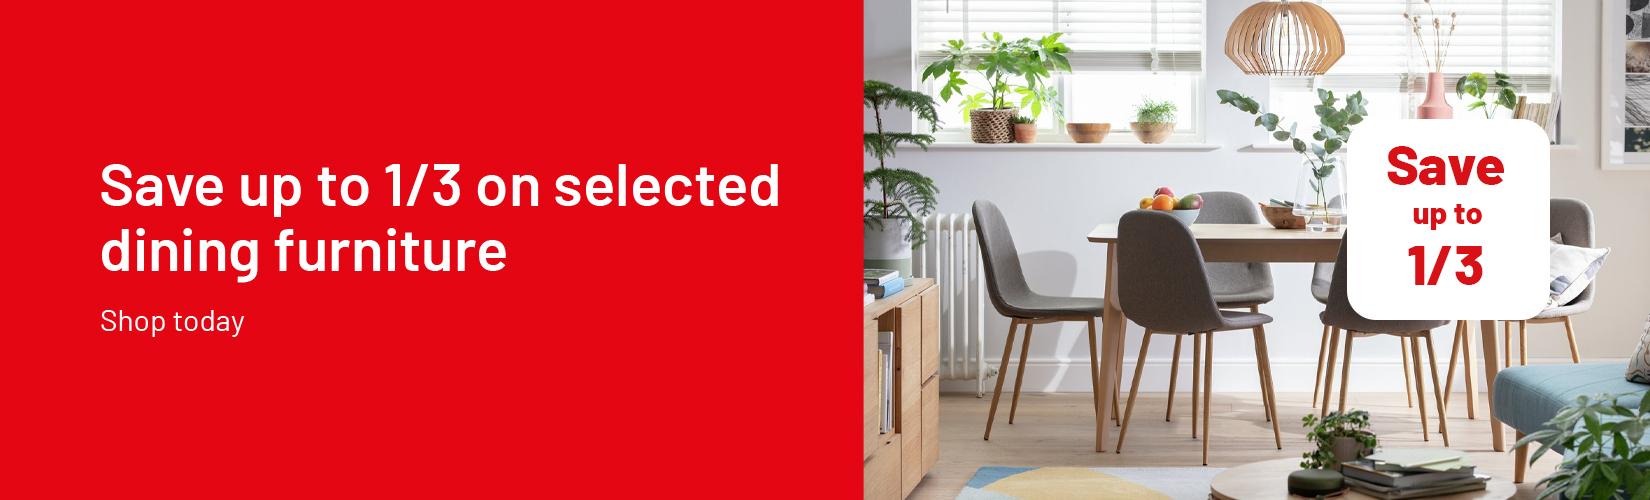 Save up to 1/3 on selected dining furniture.